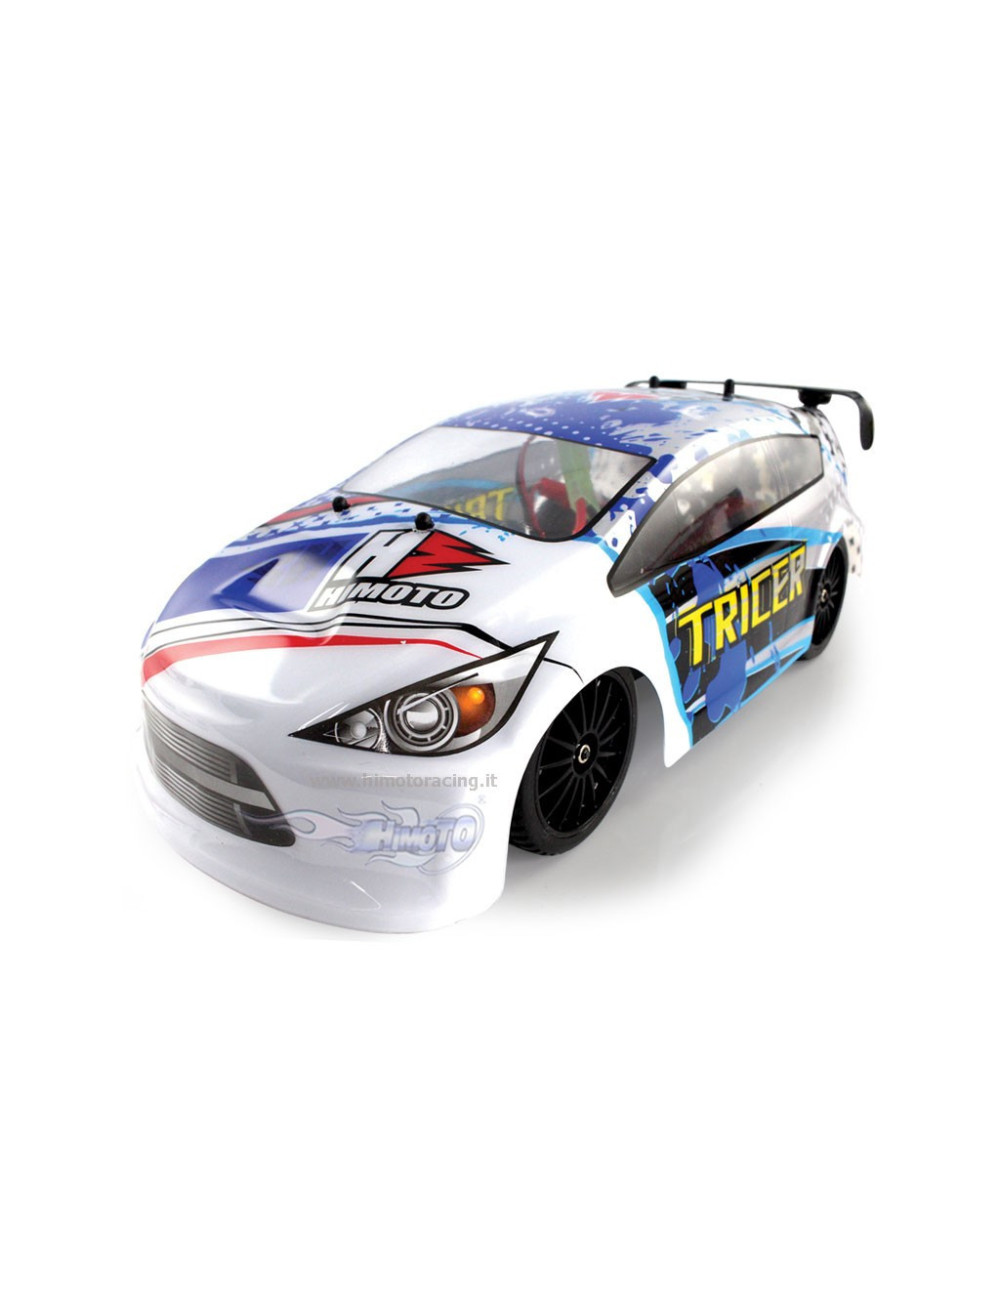 Stradale “Tricer” Brushless 1/18 Himoto 2.4gHz 4WD RTR